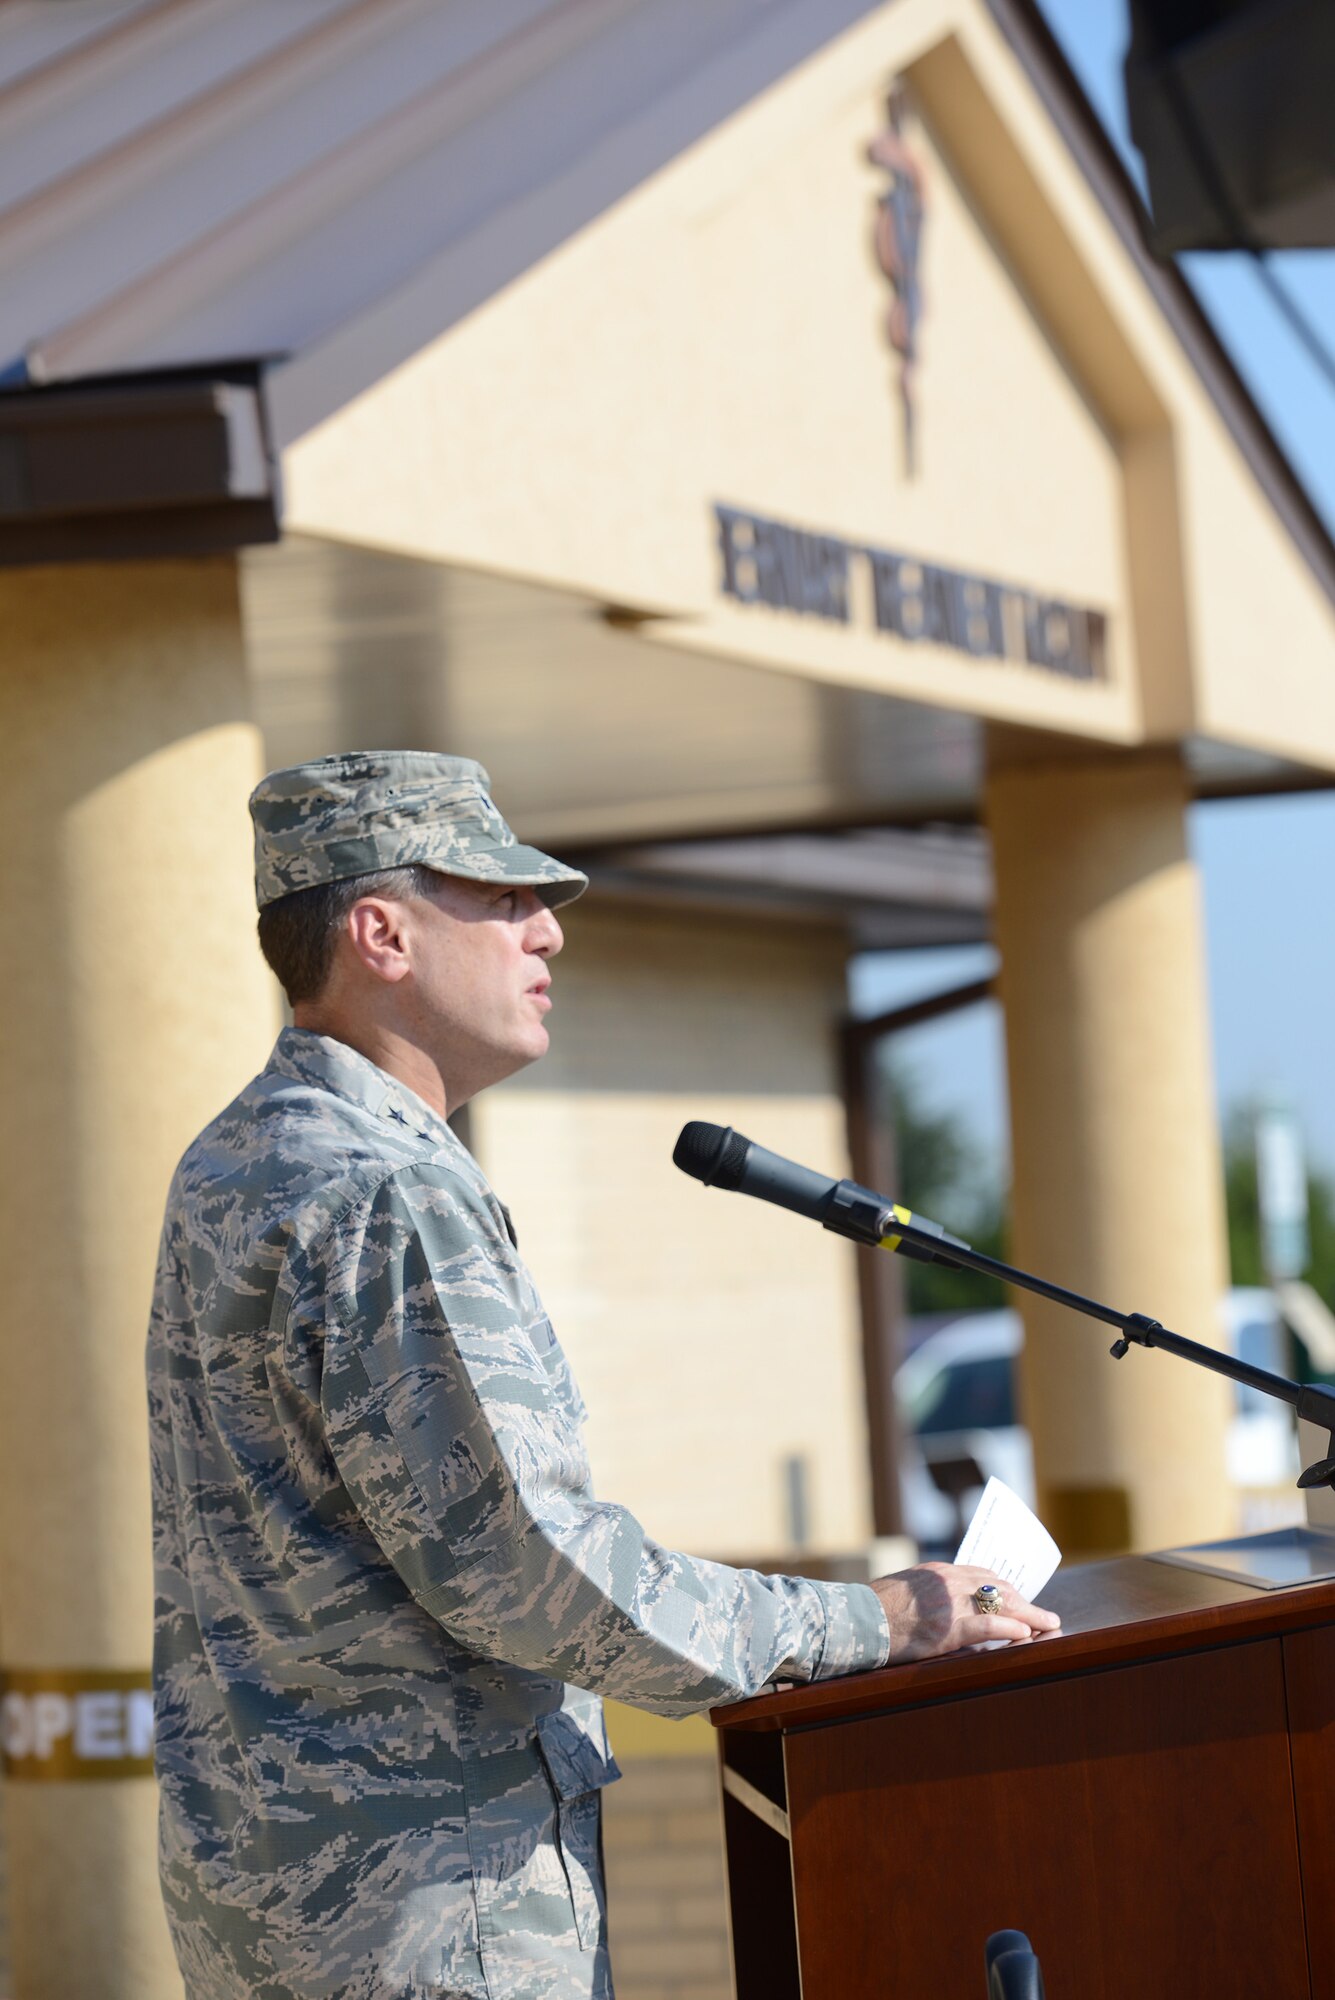 Air Force Sustainment Center Commander Lt. Gen. Lee K. Levy II gave remarks and expressed his thanks and appreciation for the continued partnership between the U.S. Army Medical Department's Veterinary Services and Tinker Air Force BAse during a ribbon cutting ceremony for the newly remodeled Veterinary Treatment Facility July 17. The vet clinic has extended its capabilities of care to be able to perform anesthetic procedures as well as placing catheters and monitors. The clinic provides care for Military Working Dogs as well as family pets for active duty, Reserve, Guard, retirees and dependents. (Air Force photo by Kelly White)